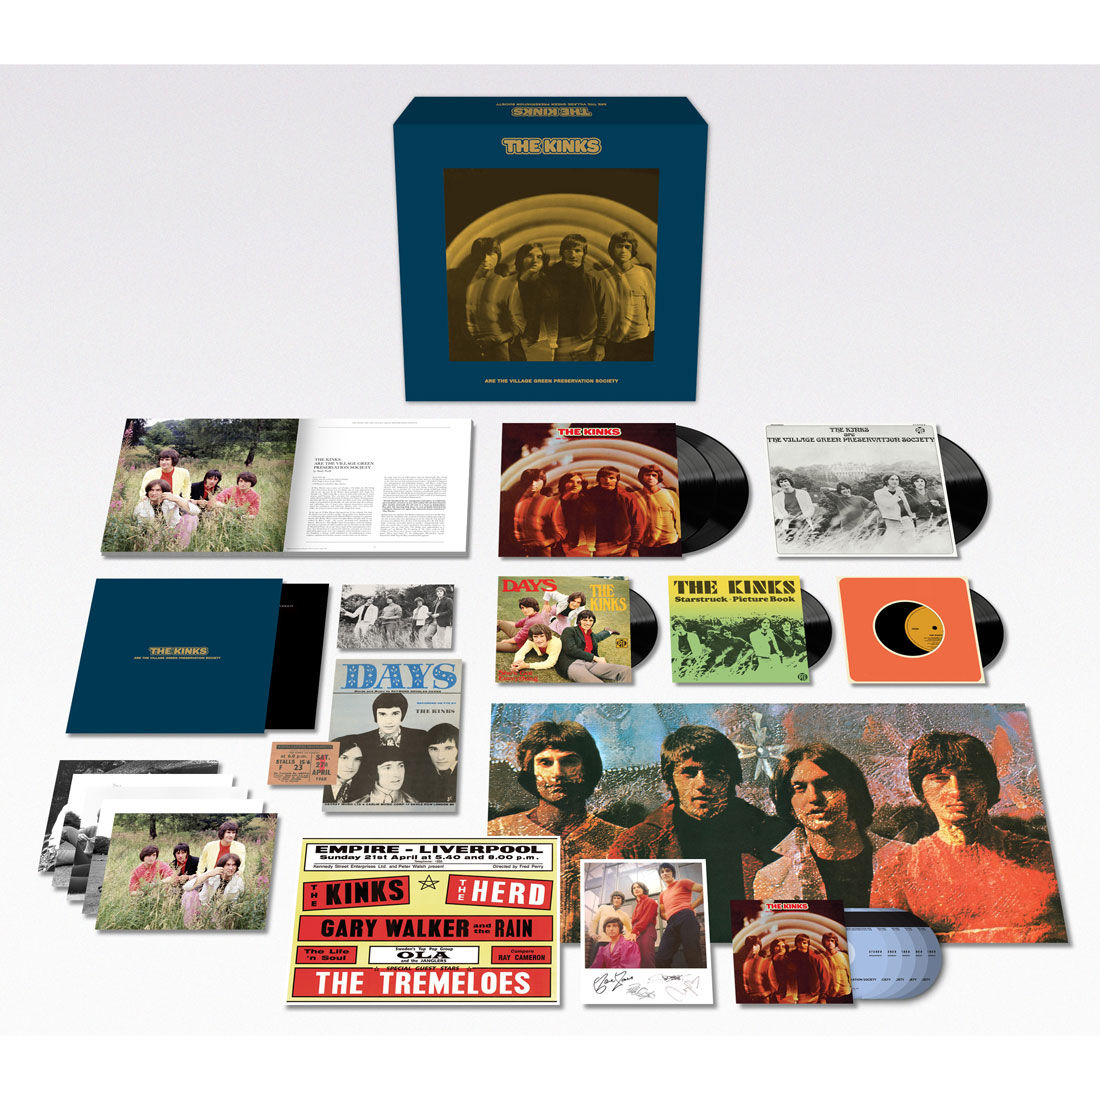 The Kinks - The Kinks Are The Village Green Preservation Society: Super Deluxe Vinyl Box Set